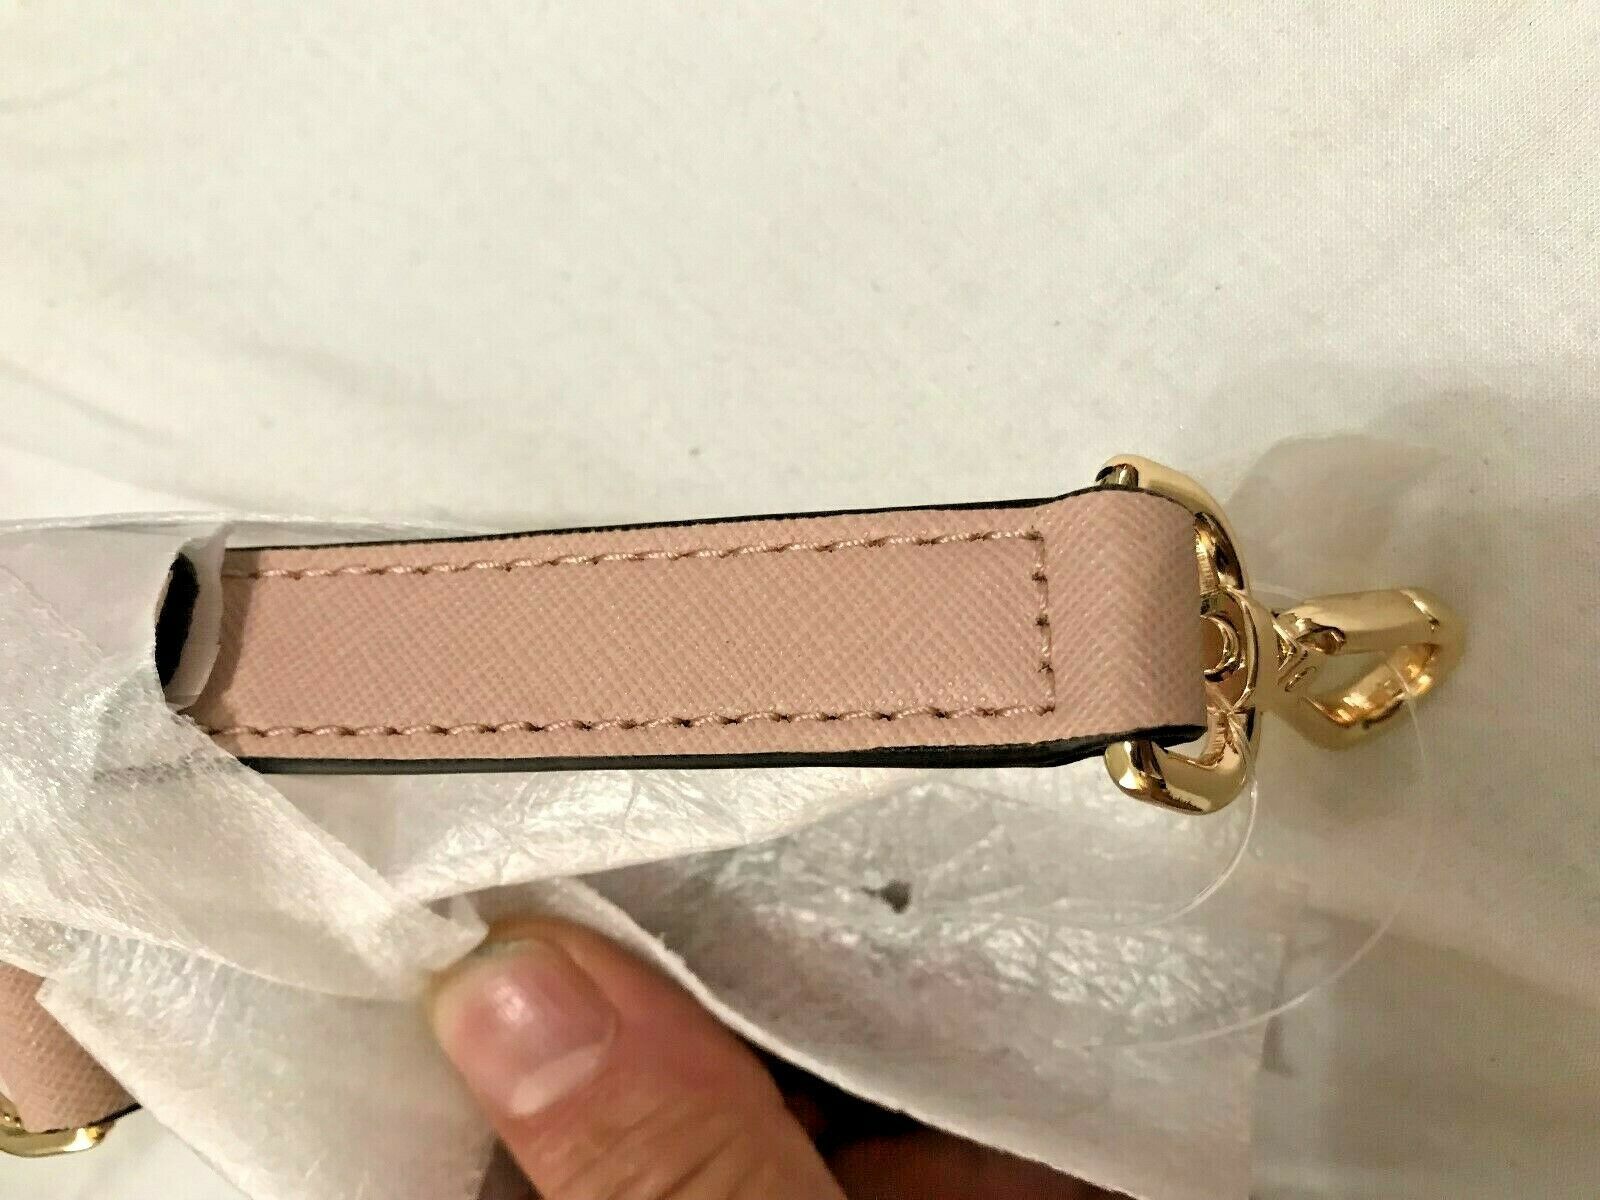 replacement straps for michael kors purse